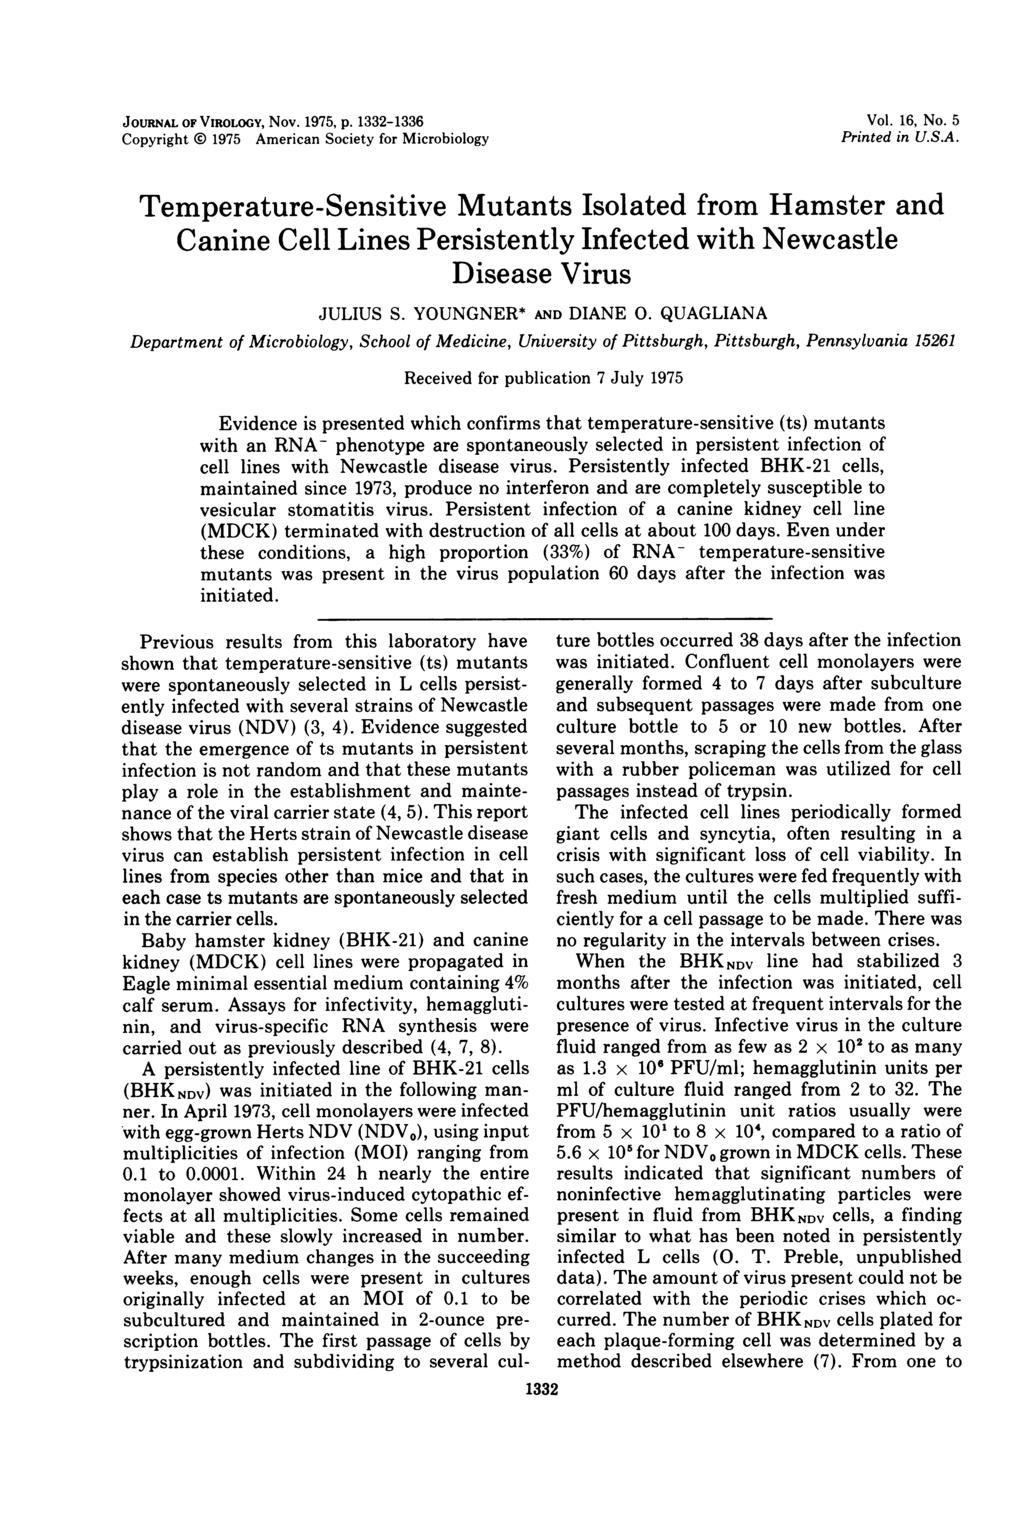 JOURNAL OF VIROLOGY, Nov. 1975, p. 1332-1336 Copyright i 1975 American Society for Microbiology Vol. 16, No. 5 Printed in U.S.A. Temperature-Sensitive Mutants Isolated from Hamster and Canine Cell Lines Persistently Infected with Newcastle Disease Virus JULIUS S.